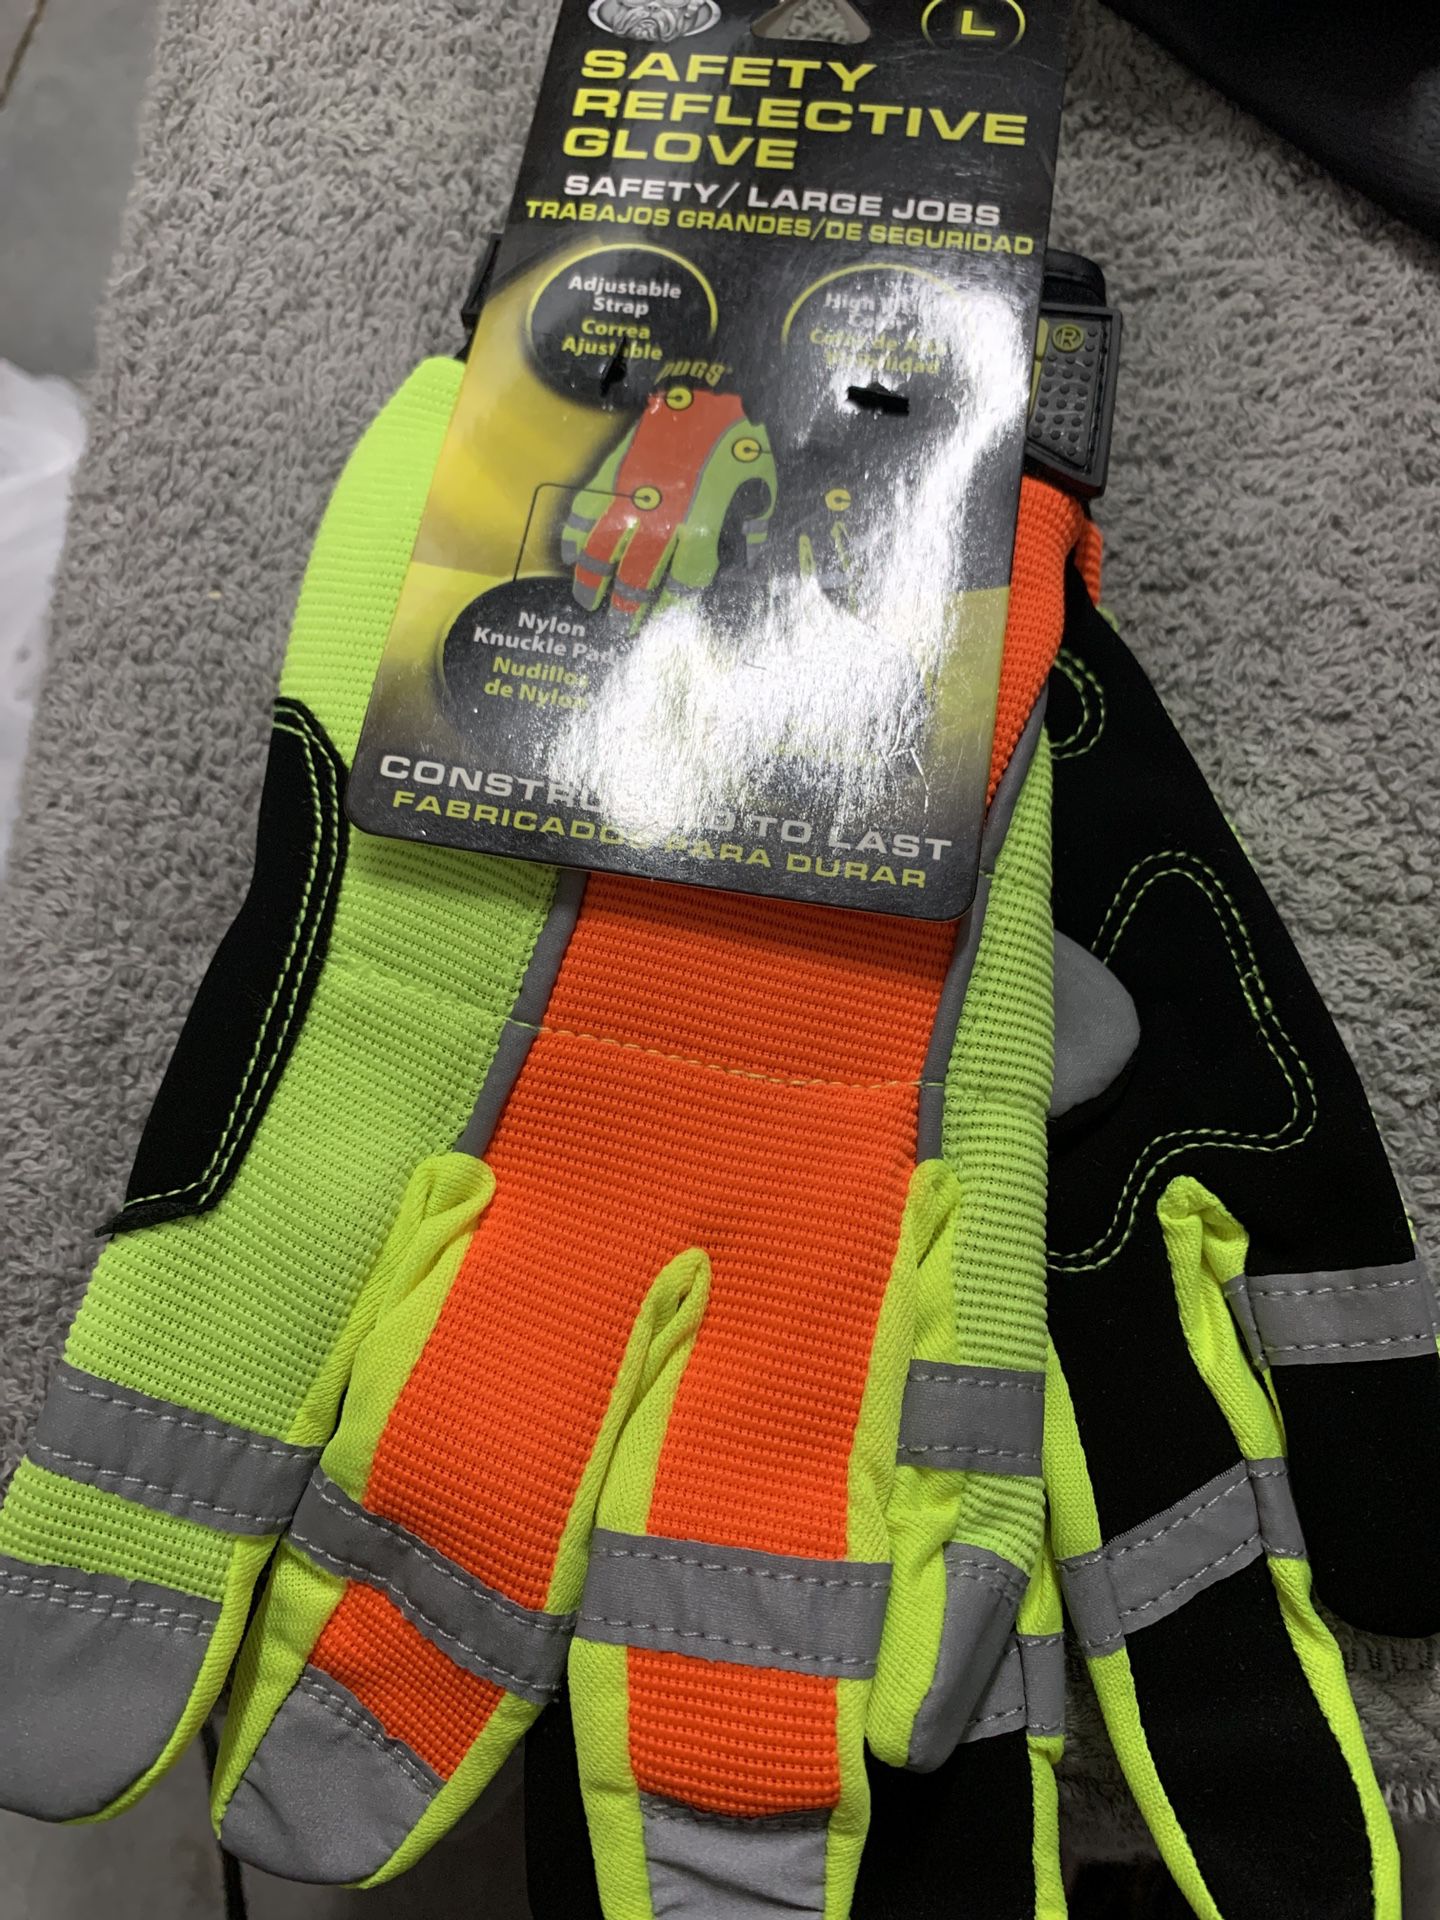 Brand new and available safety reflective gloves